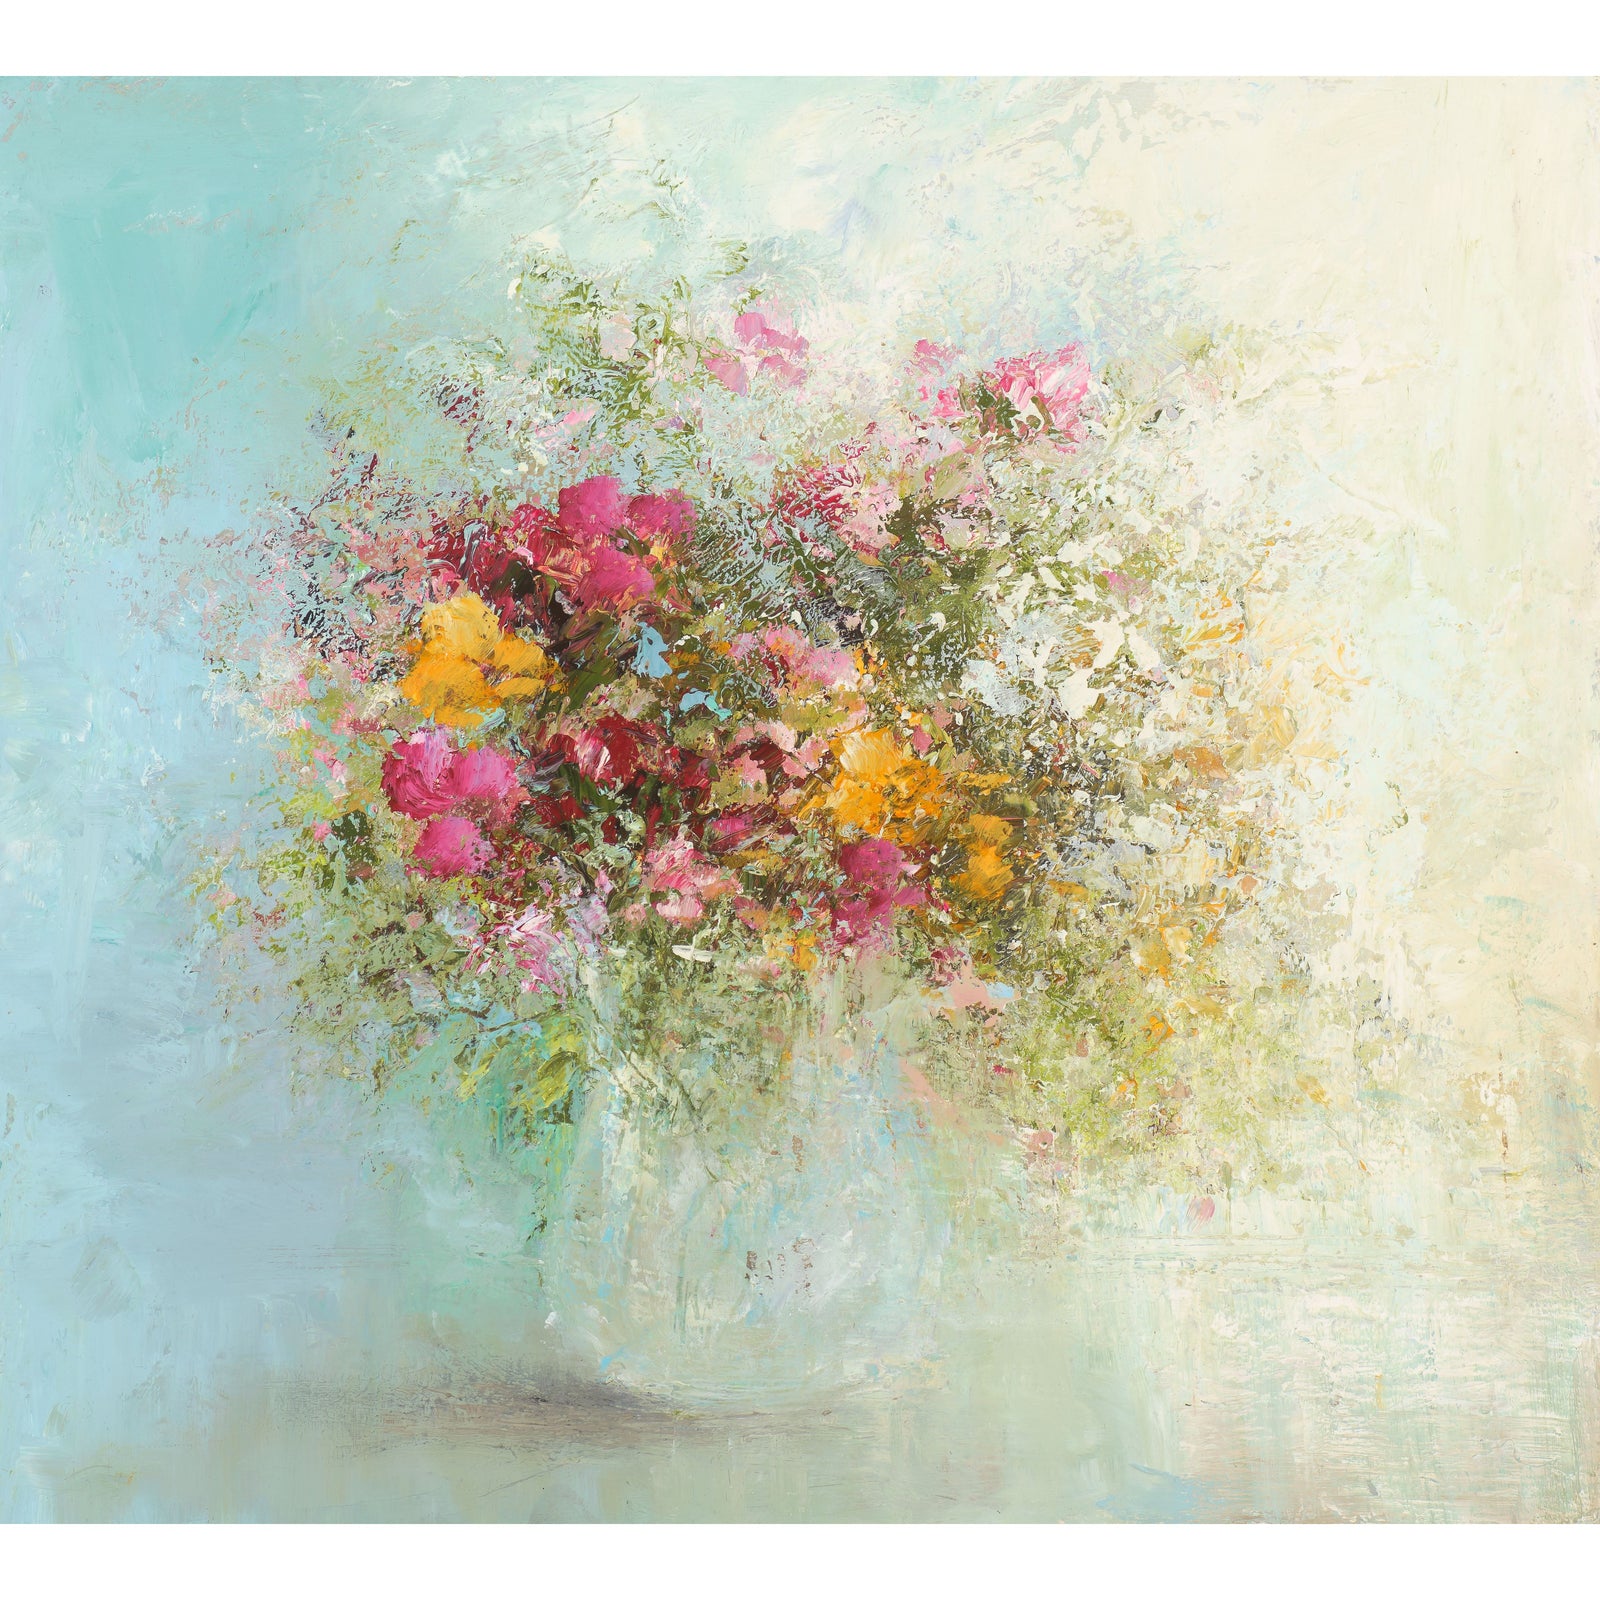 'The Gentle Beauty Of Summer Flowers' oil on board original by Amanda Hoskin, available at Padstow Gallery, Cornwall